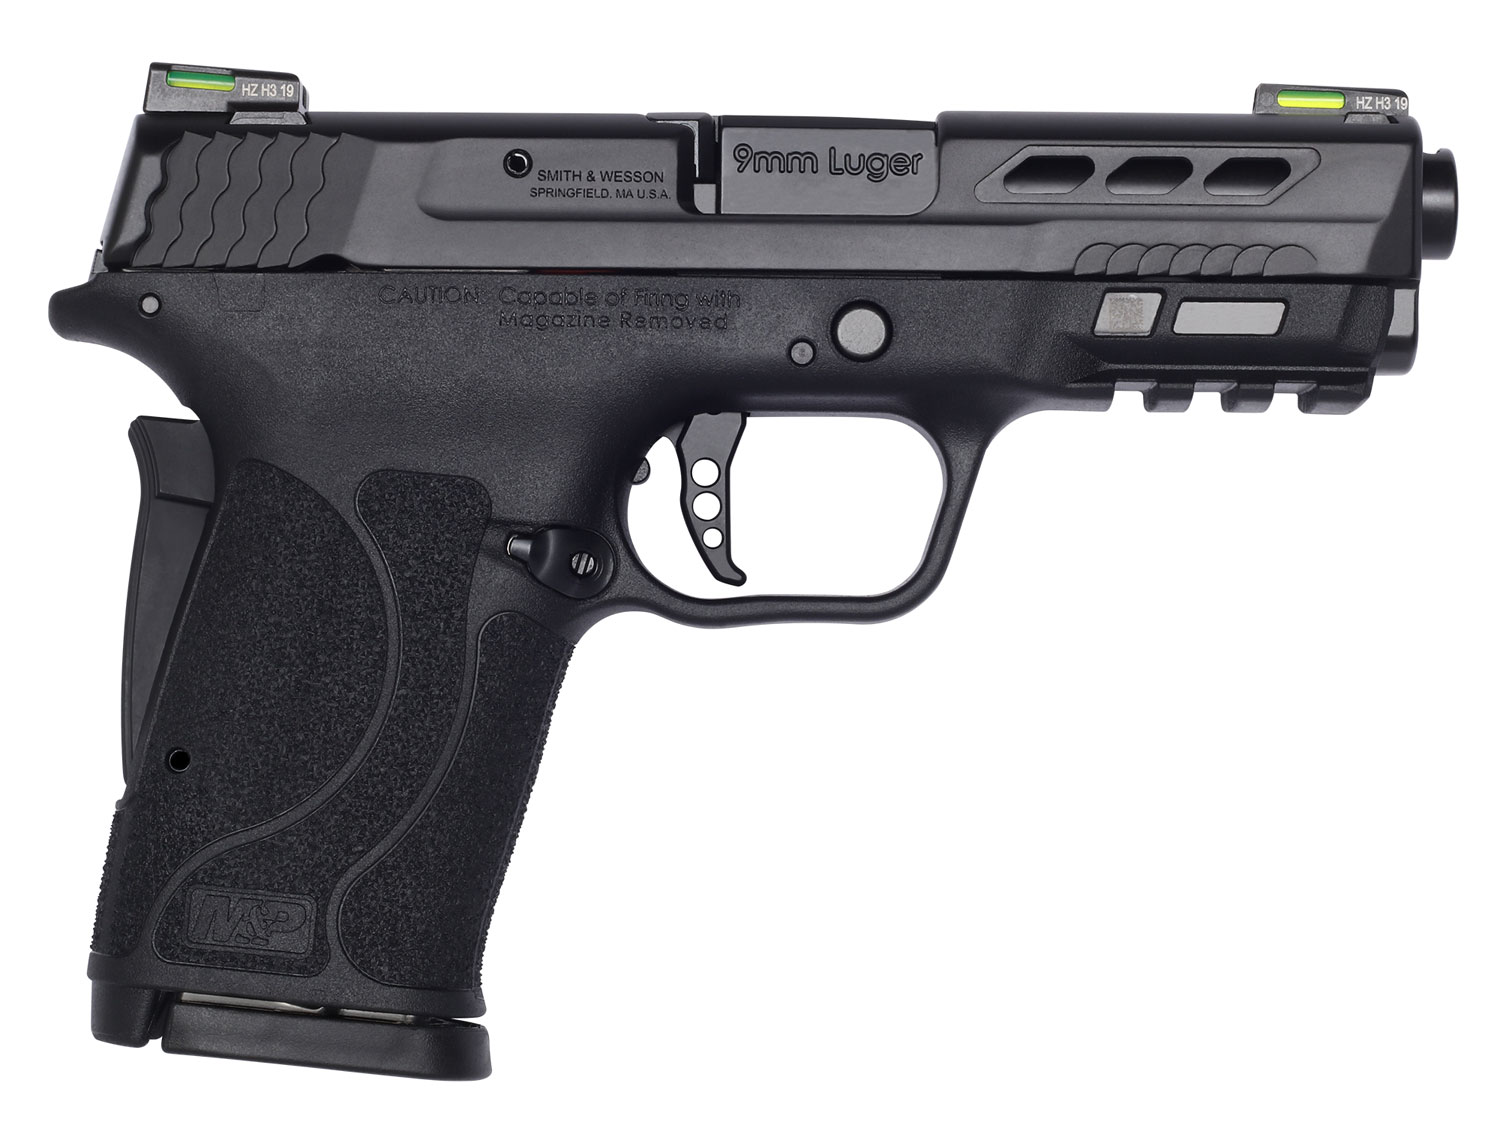 S&W SHIELD M2.0 M&P 9MM EZ PERF CENT BLK W/ CLEANING KIT!